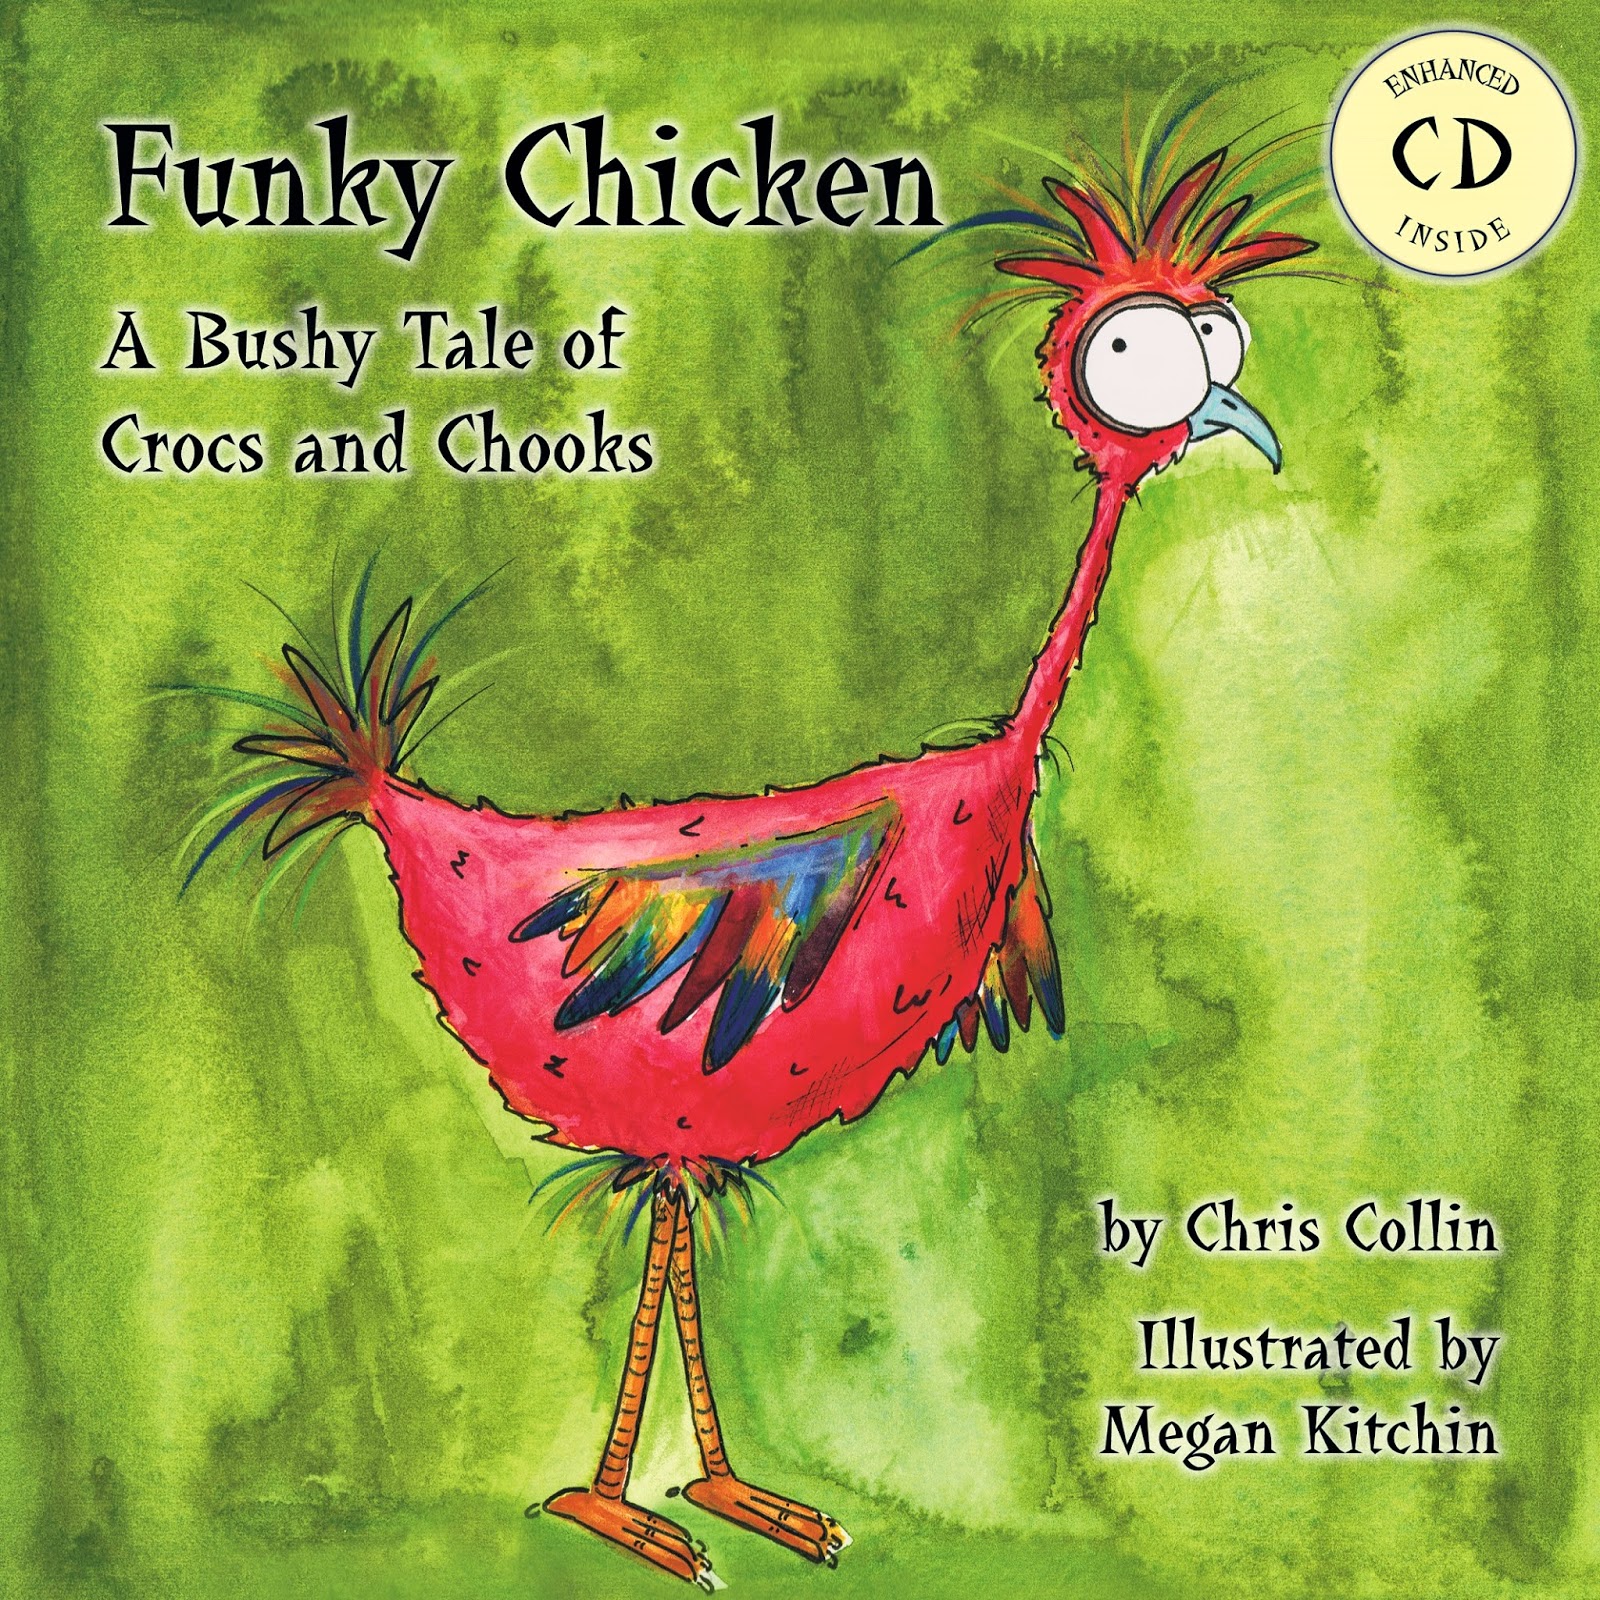 Catch The Funky Chicken